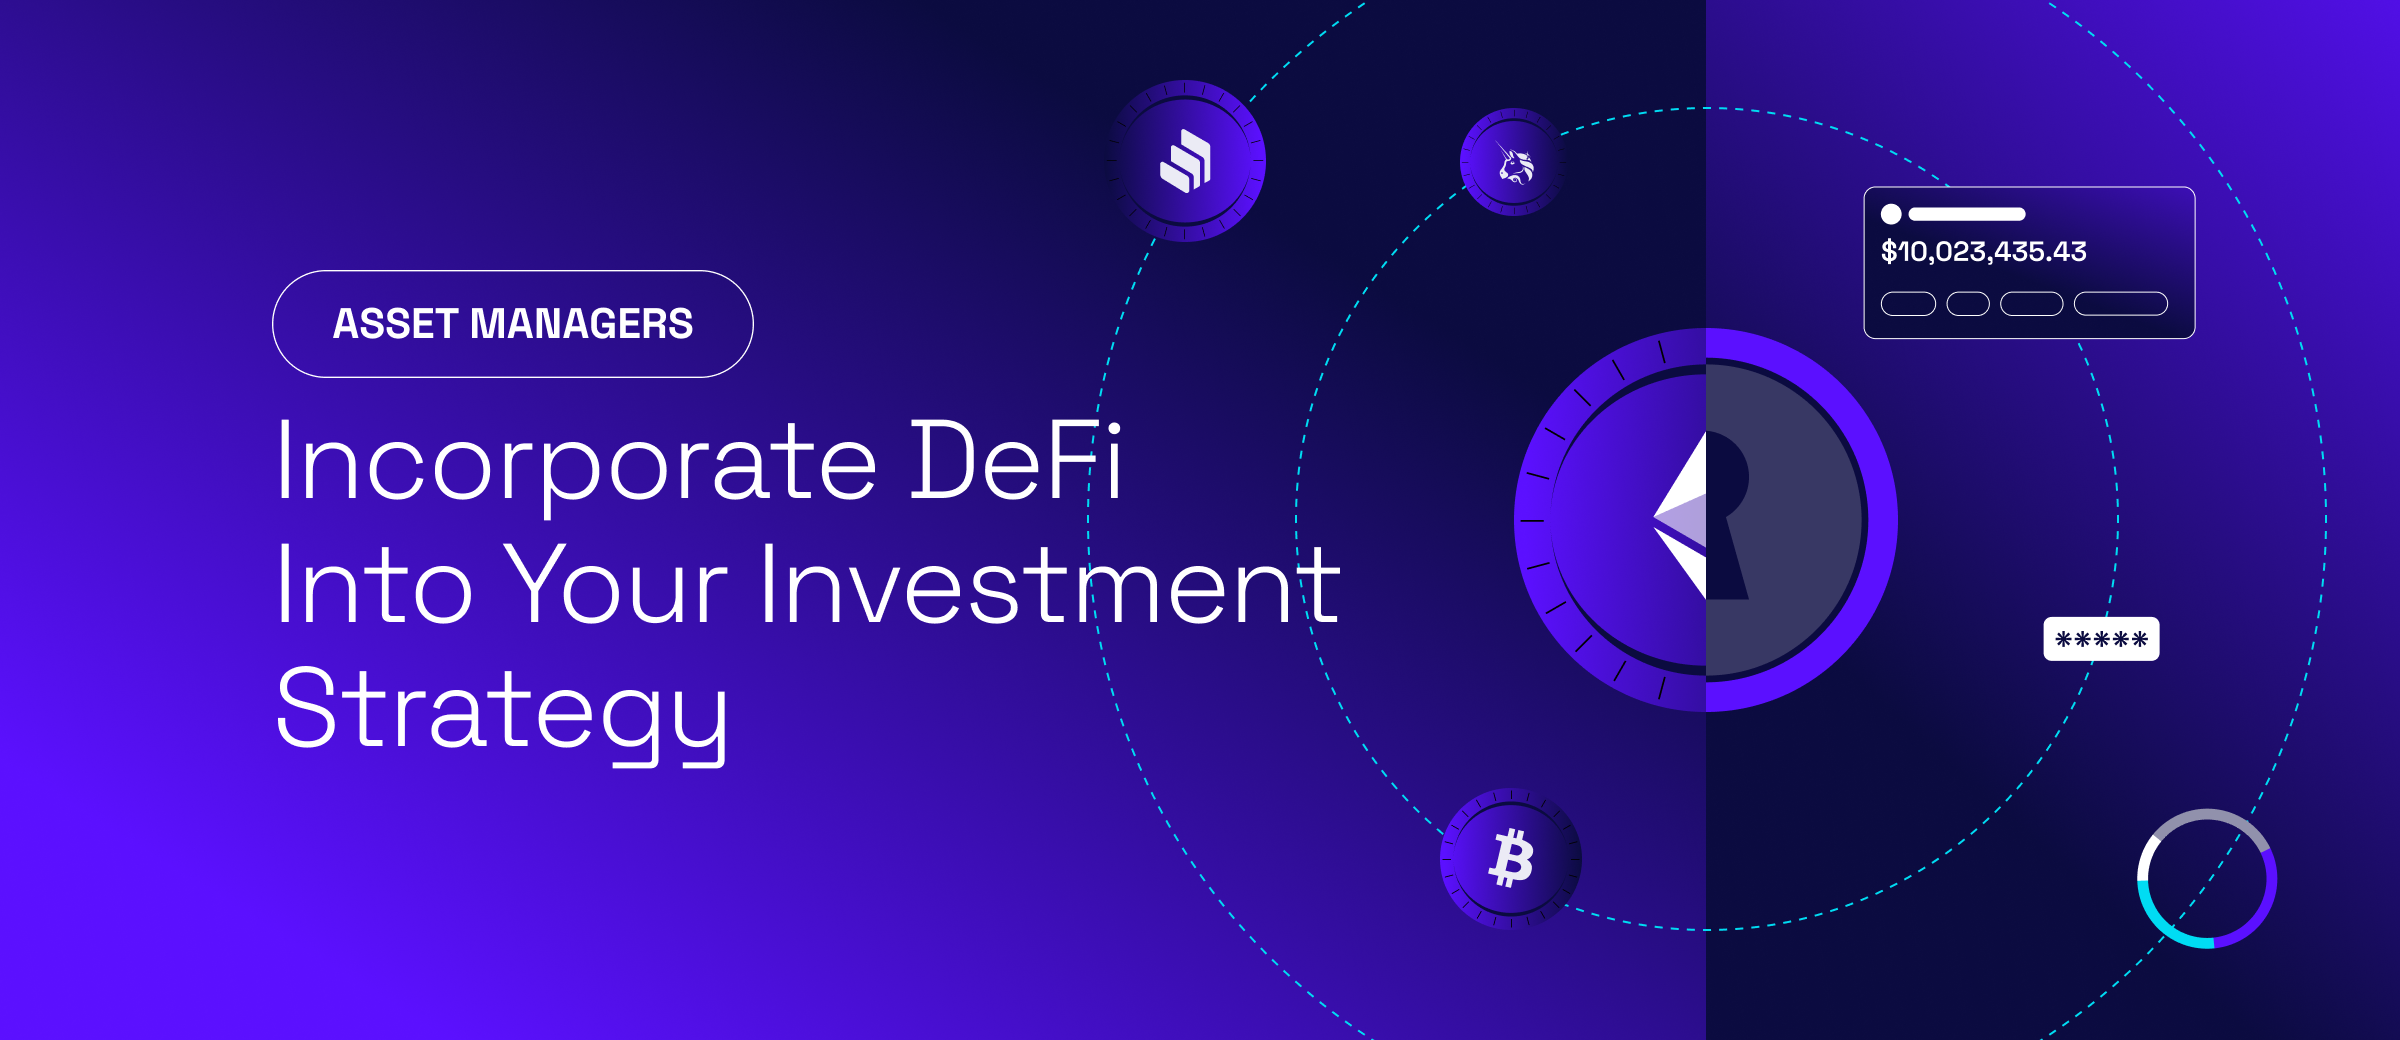 incorporate defi into your investment strategy hero image